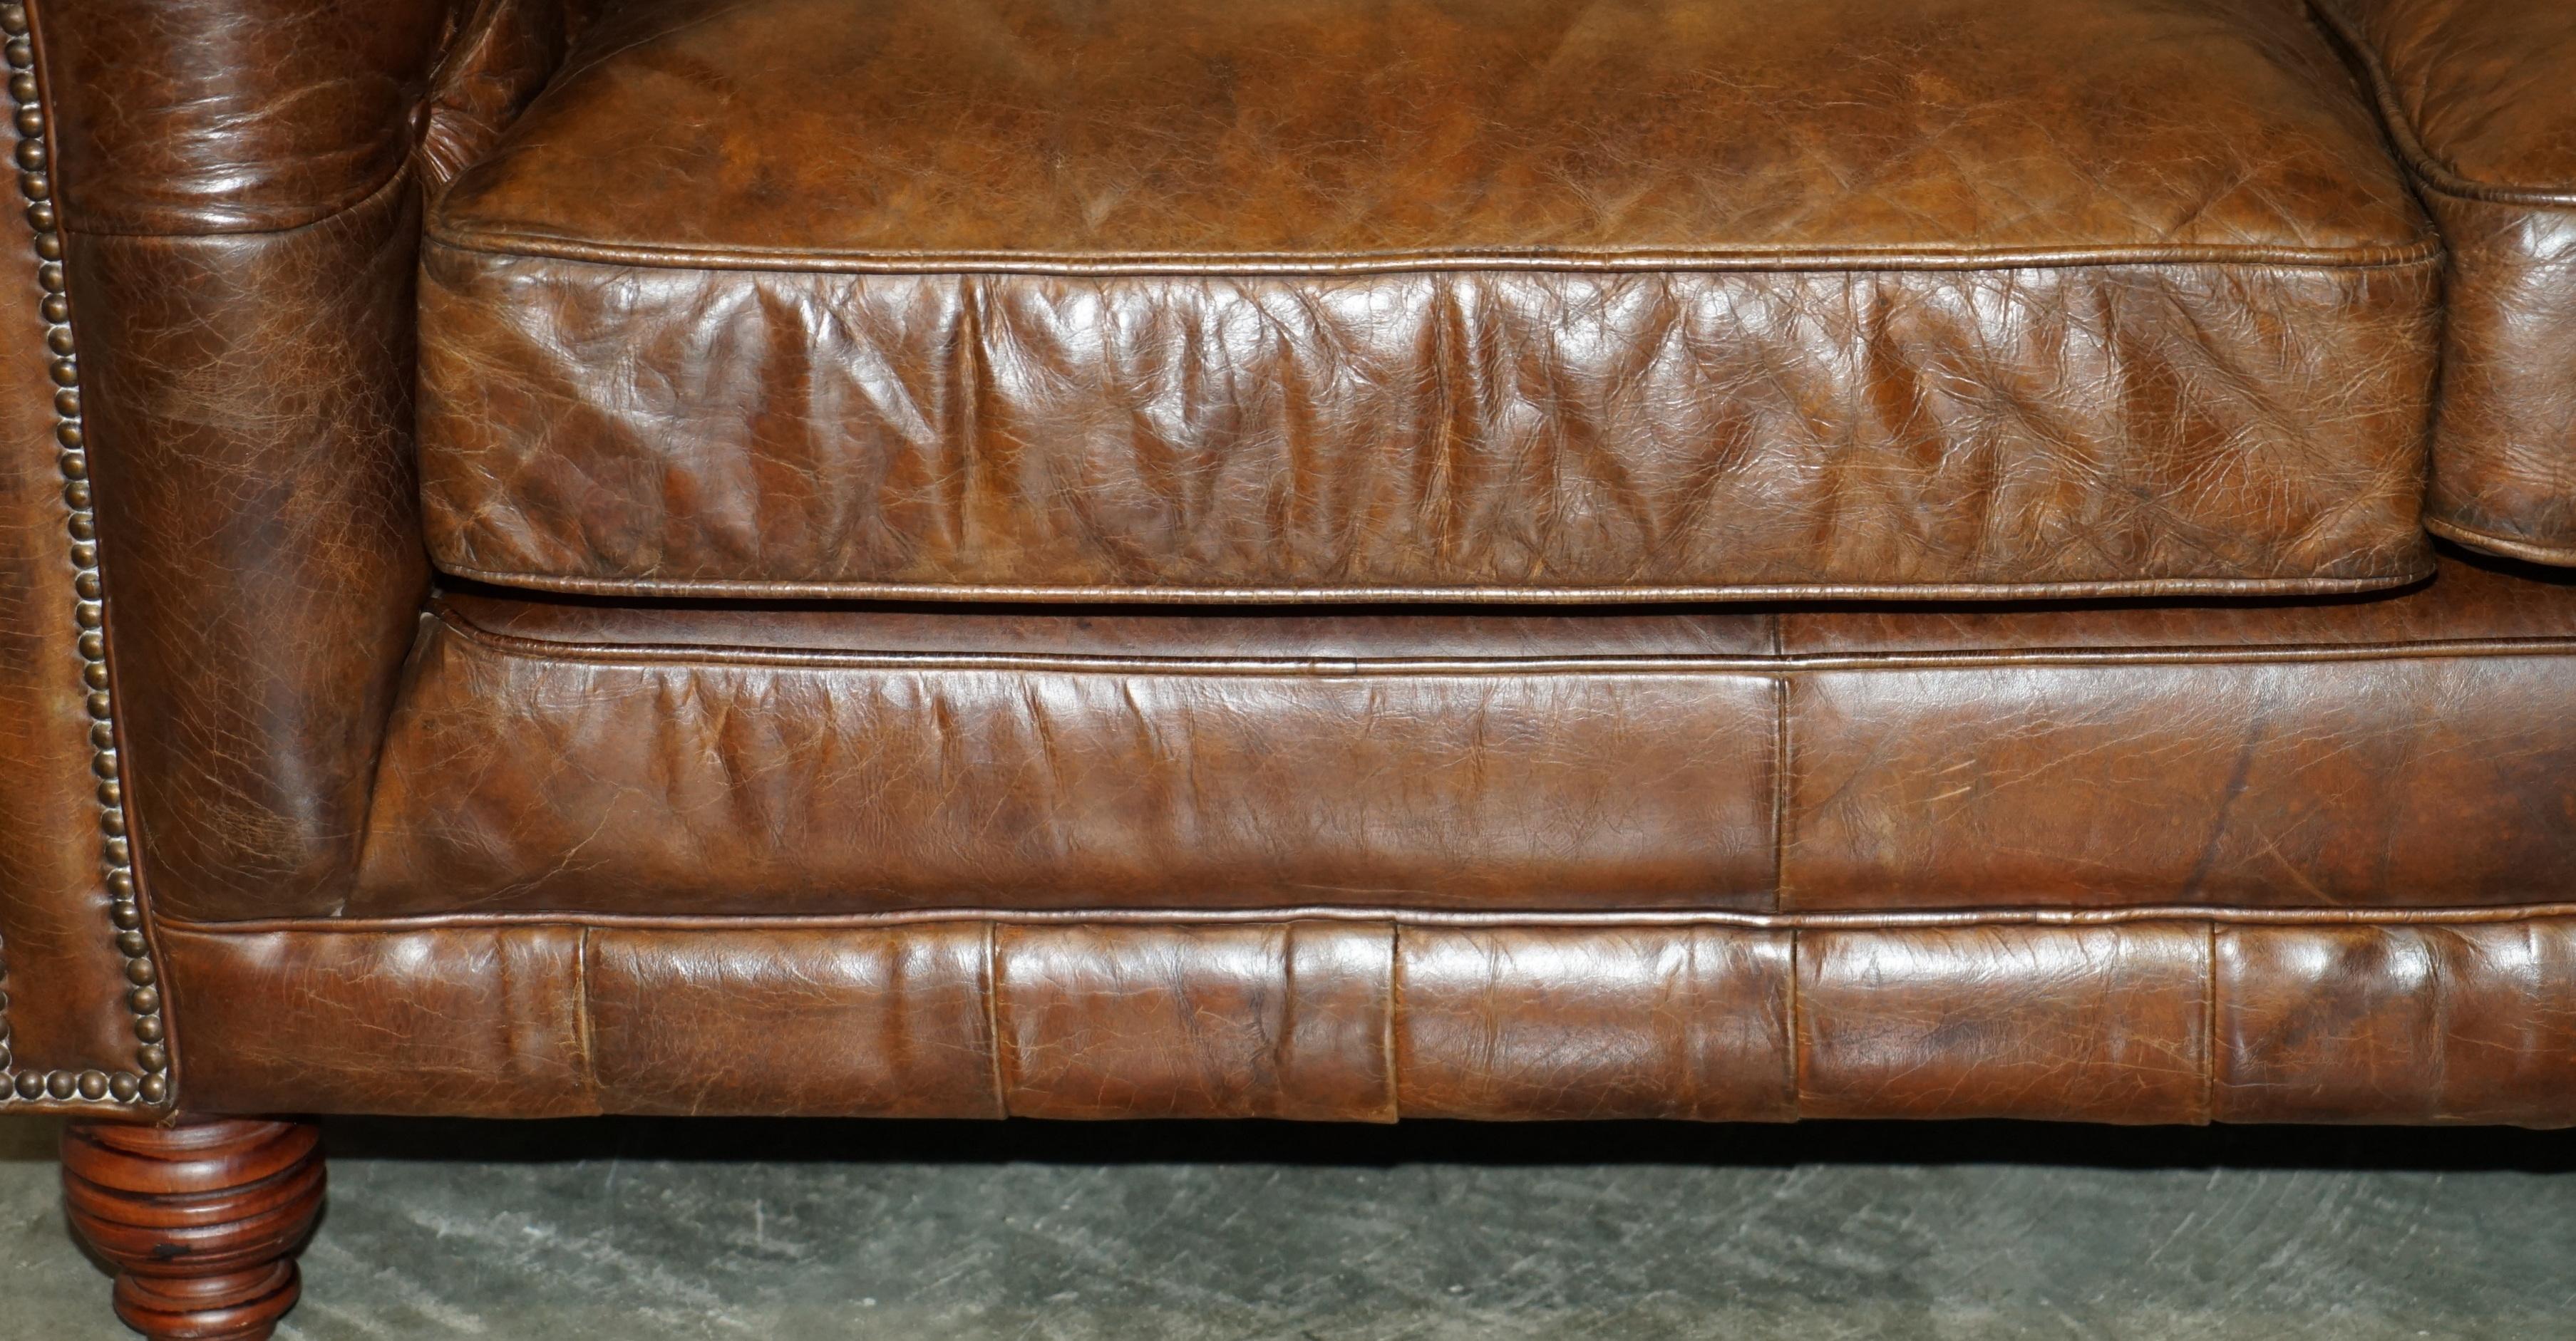 20th Century 1 OF 2 TIMOTHY OULTON HERiTAGE BROWN VINTAGE LEATHER CHESTERFIELD HALO SOFAS For Sale